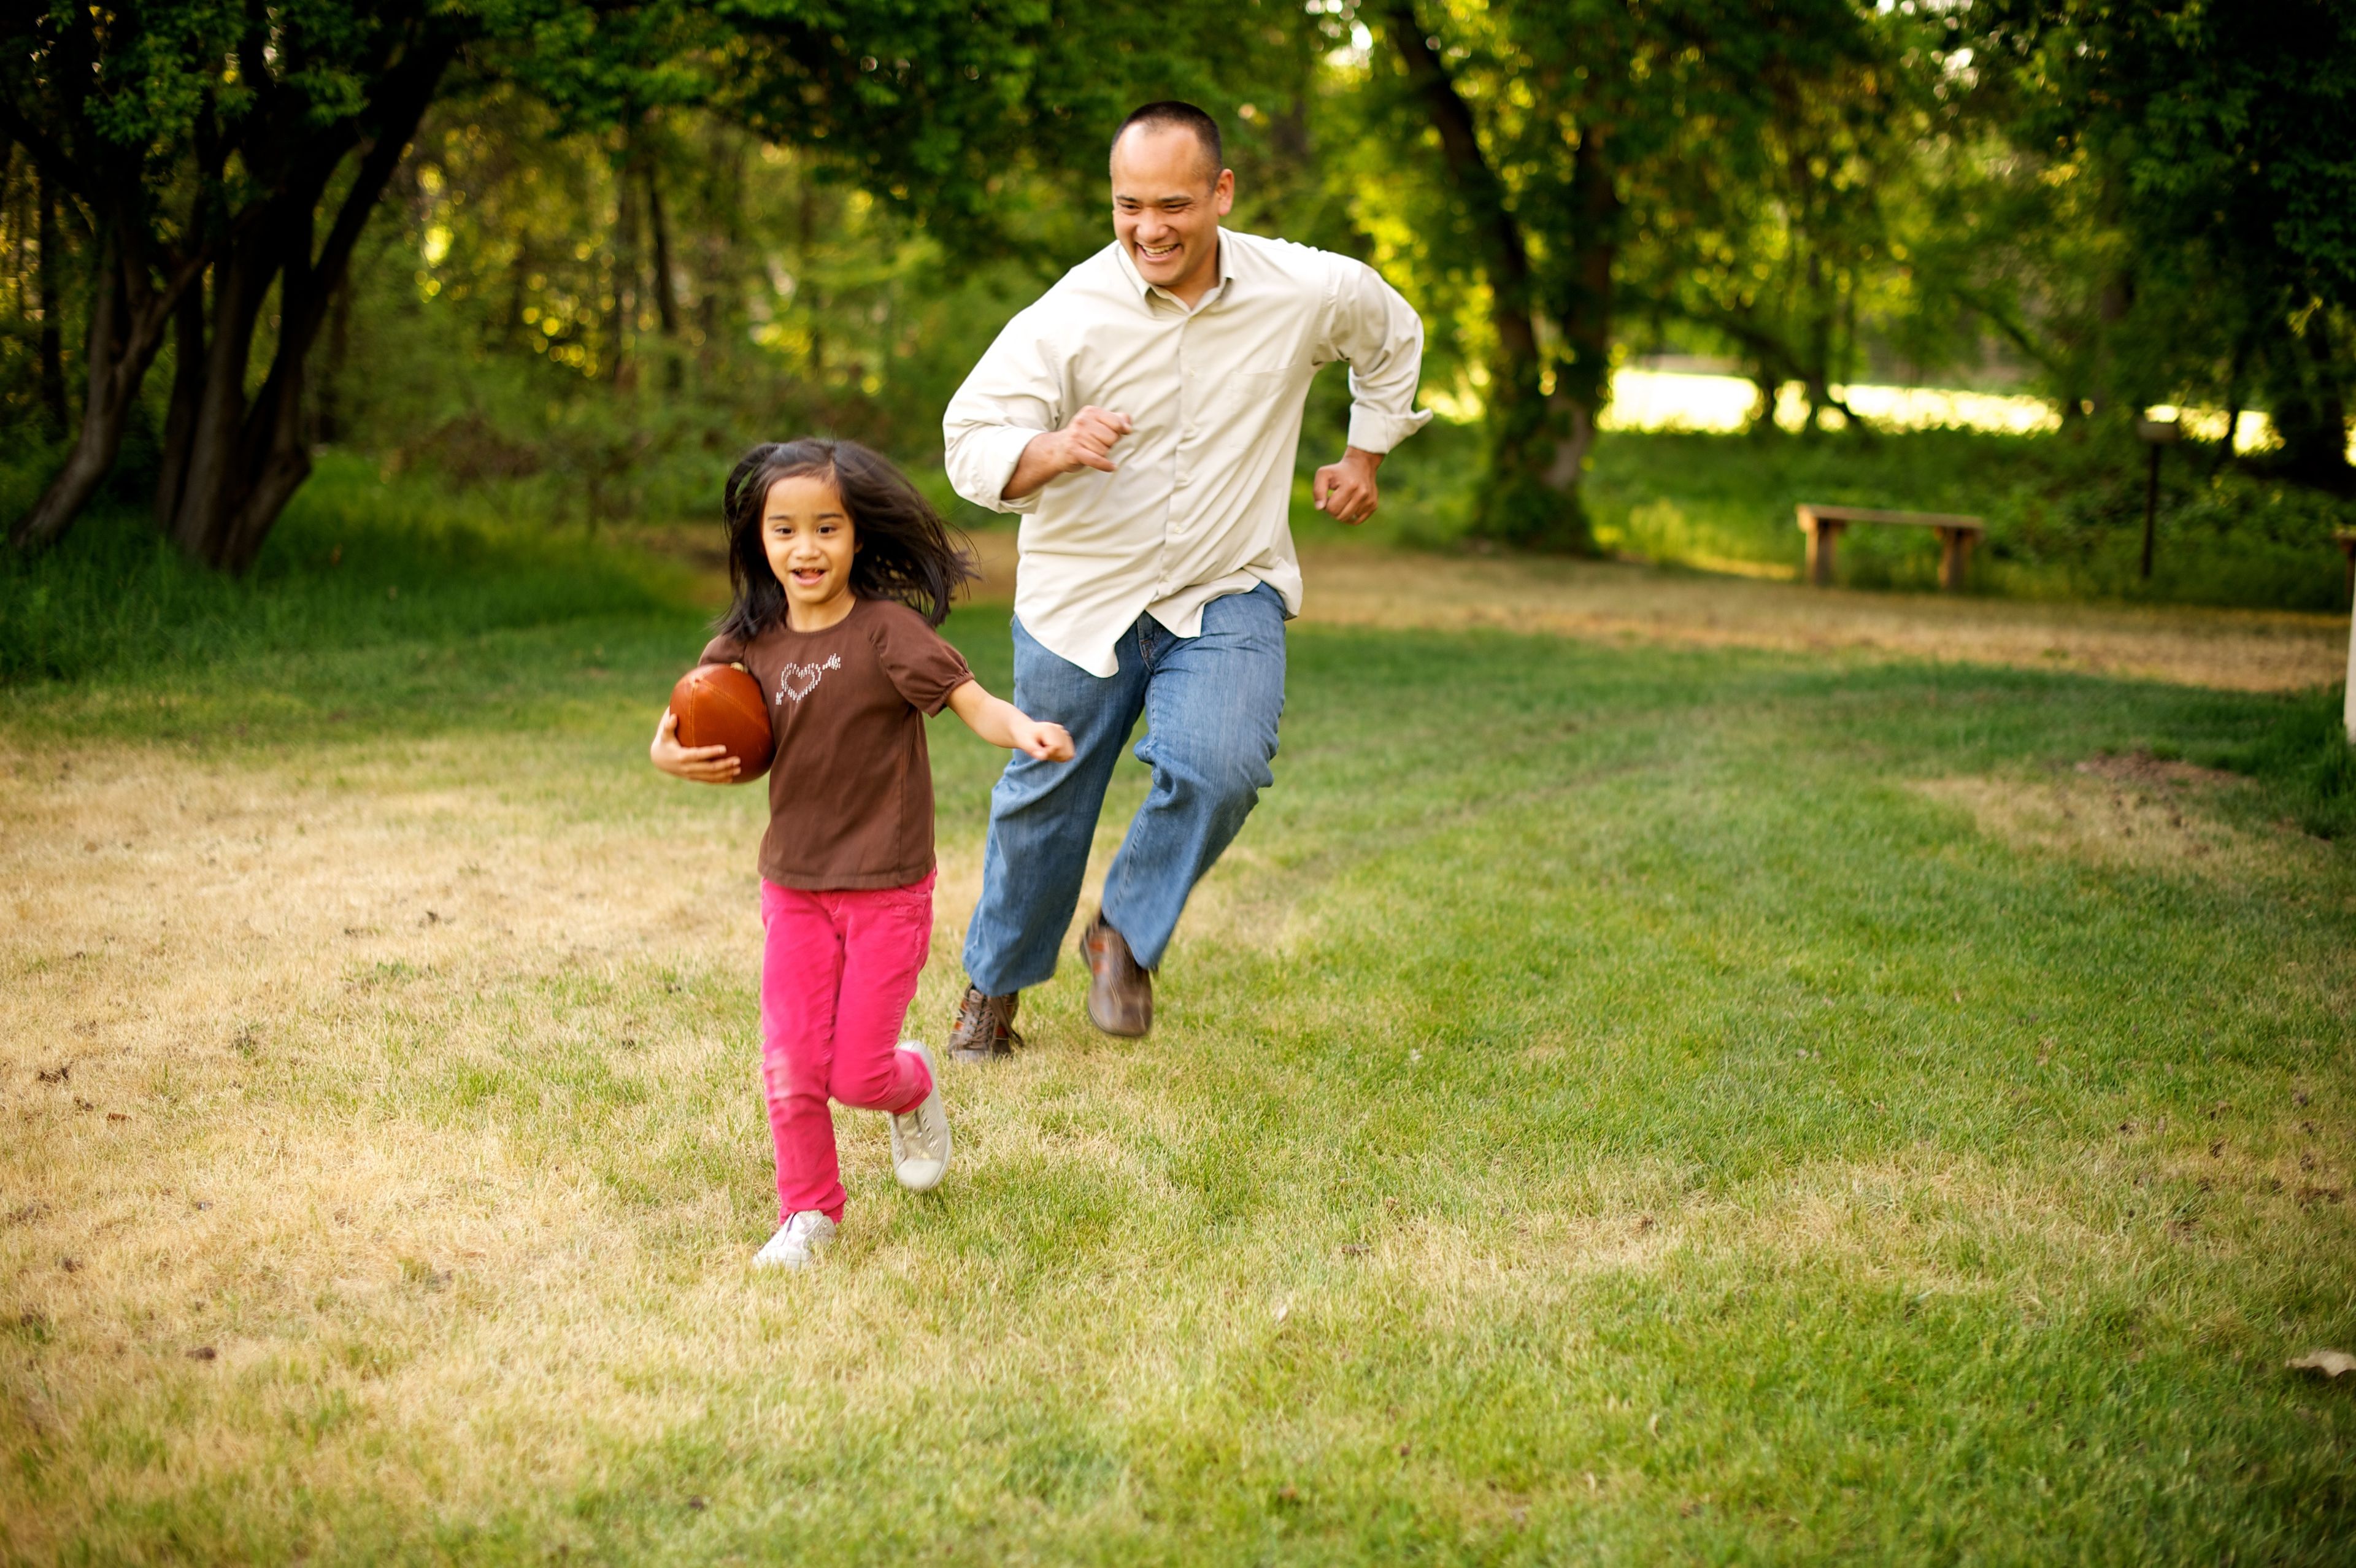 A father plays football with his daughter.